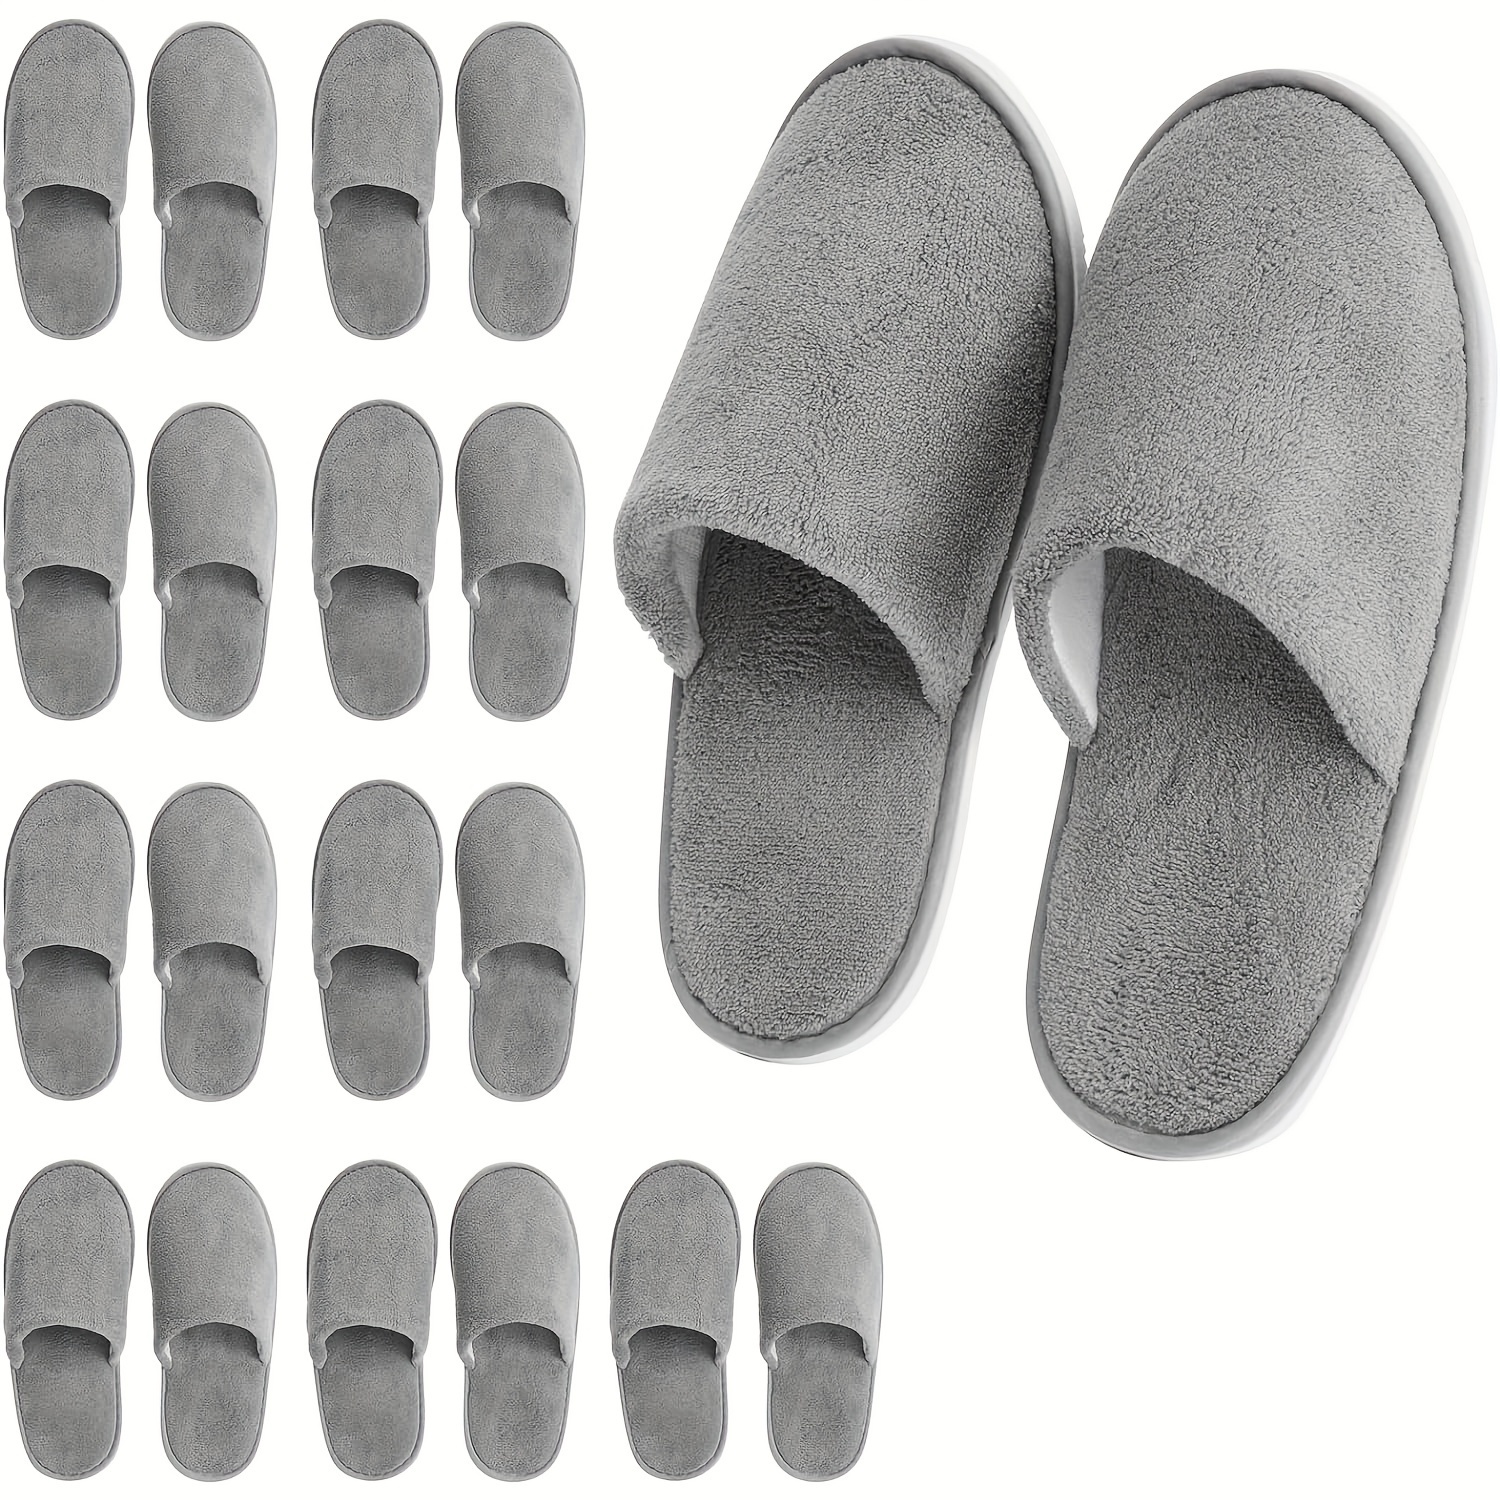 

10 Pairs Guest Disposable Slippers, Bulk For Hotel, Spa, Shoeless Family, Disposable Slippers For Spa Guests Hotels Travel, (us Men Size 11, Women Size 12)